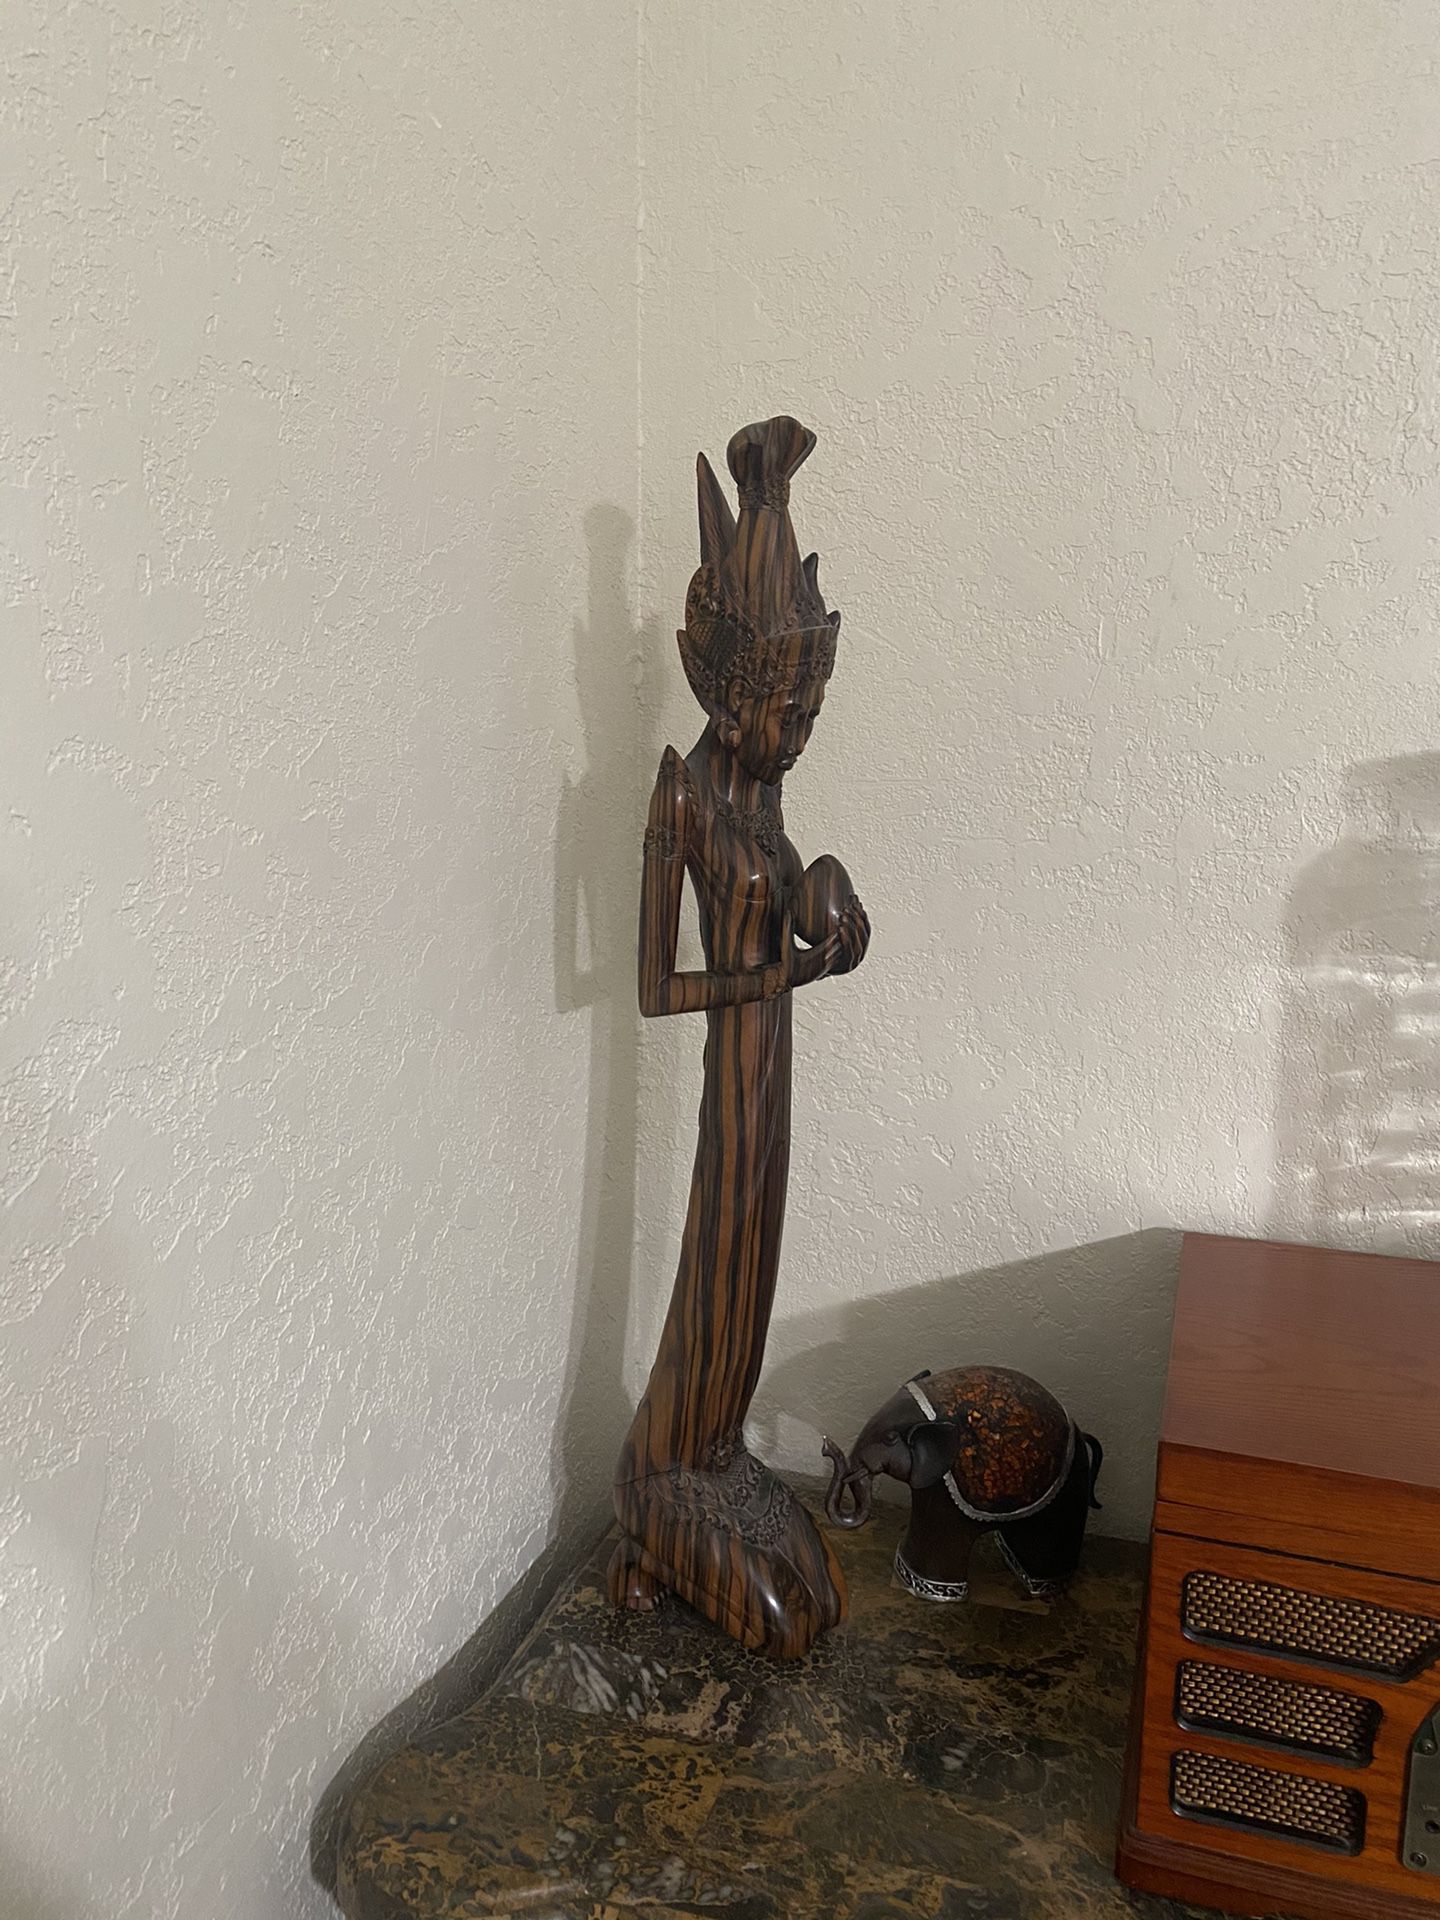 29” hand carved wooden Statue holding an egg